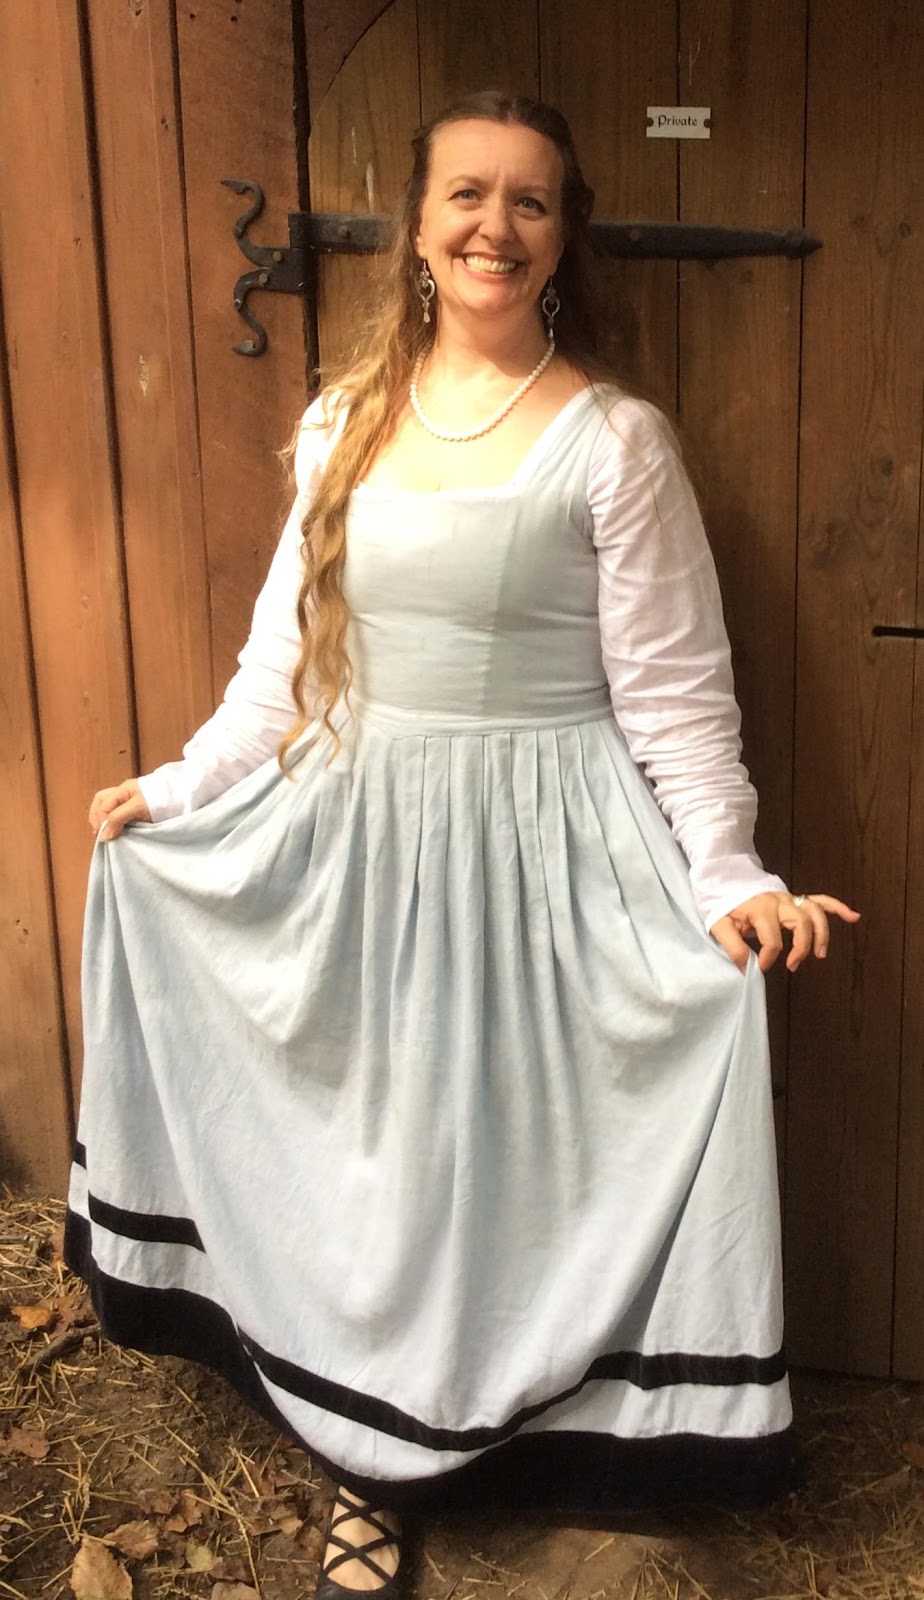 Performing in Costume - American Recorder Society